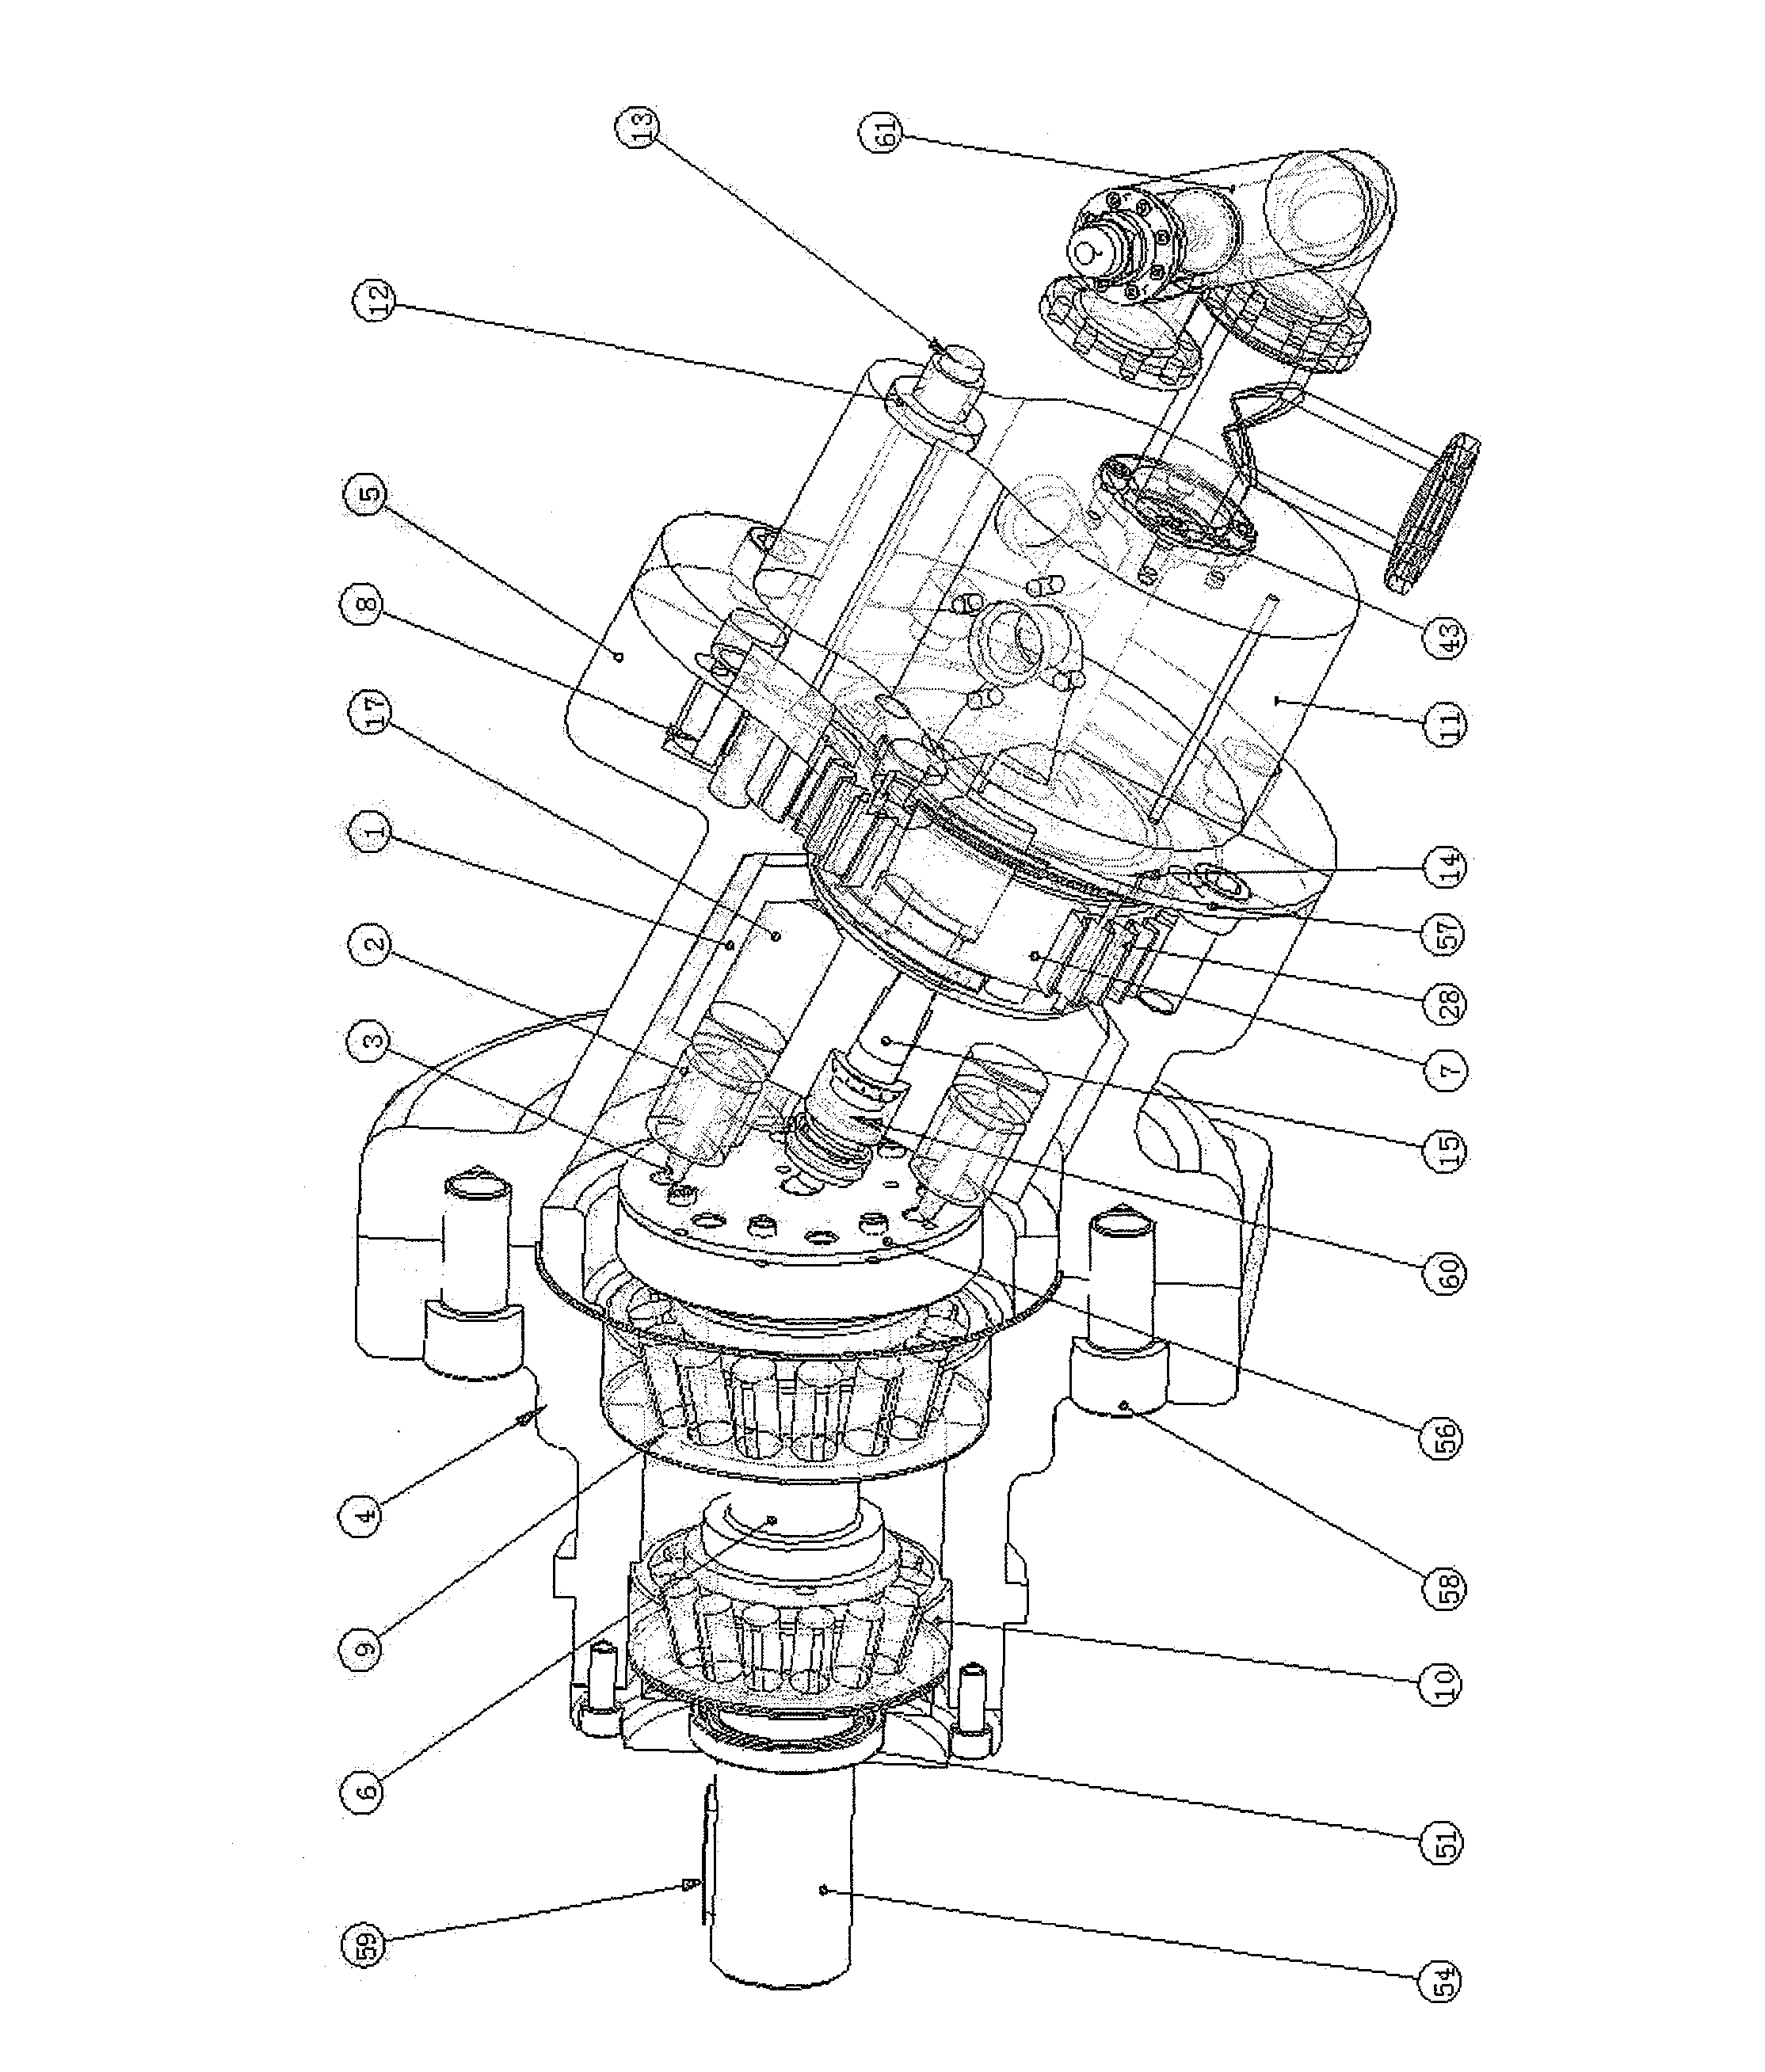 Hydraulic transformer with safety device